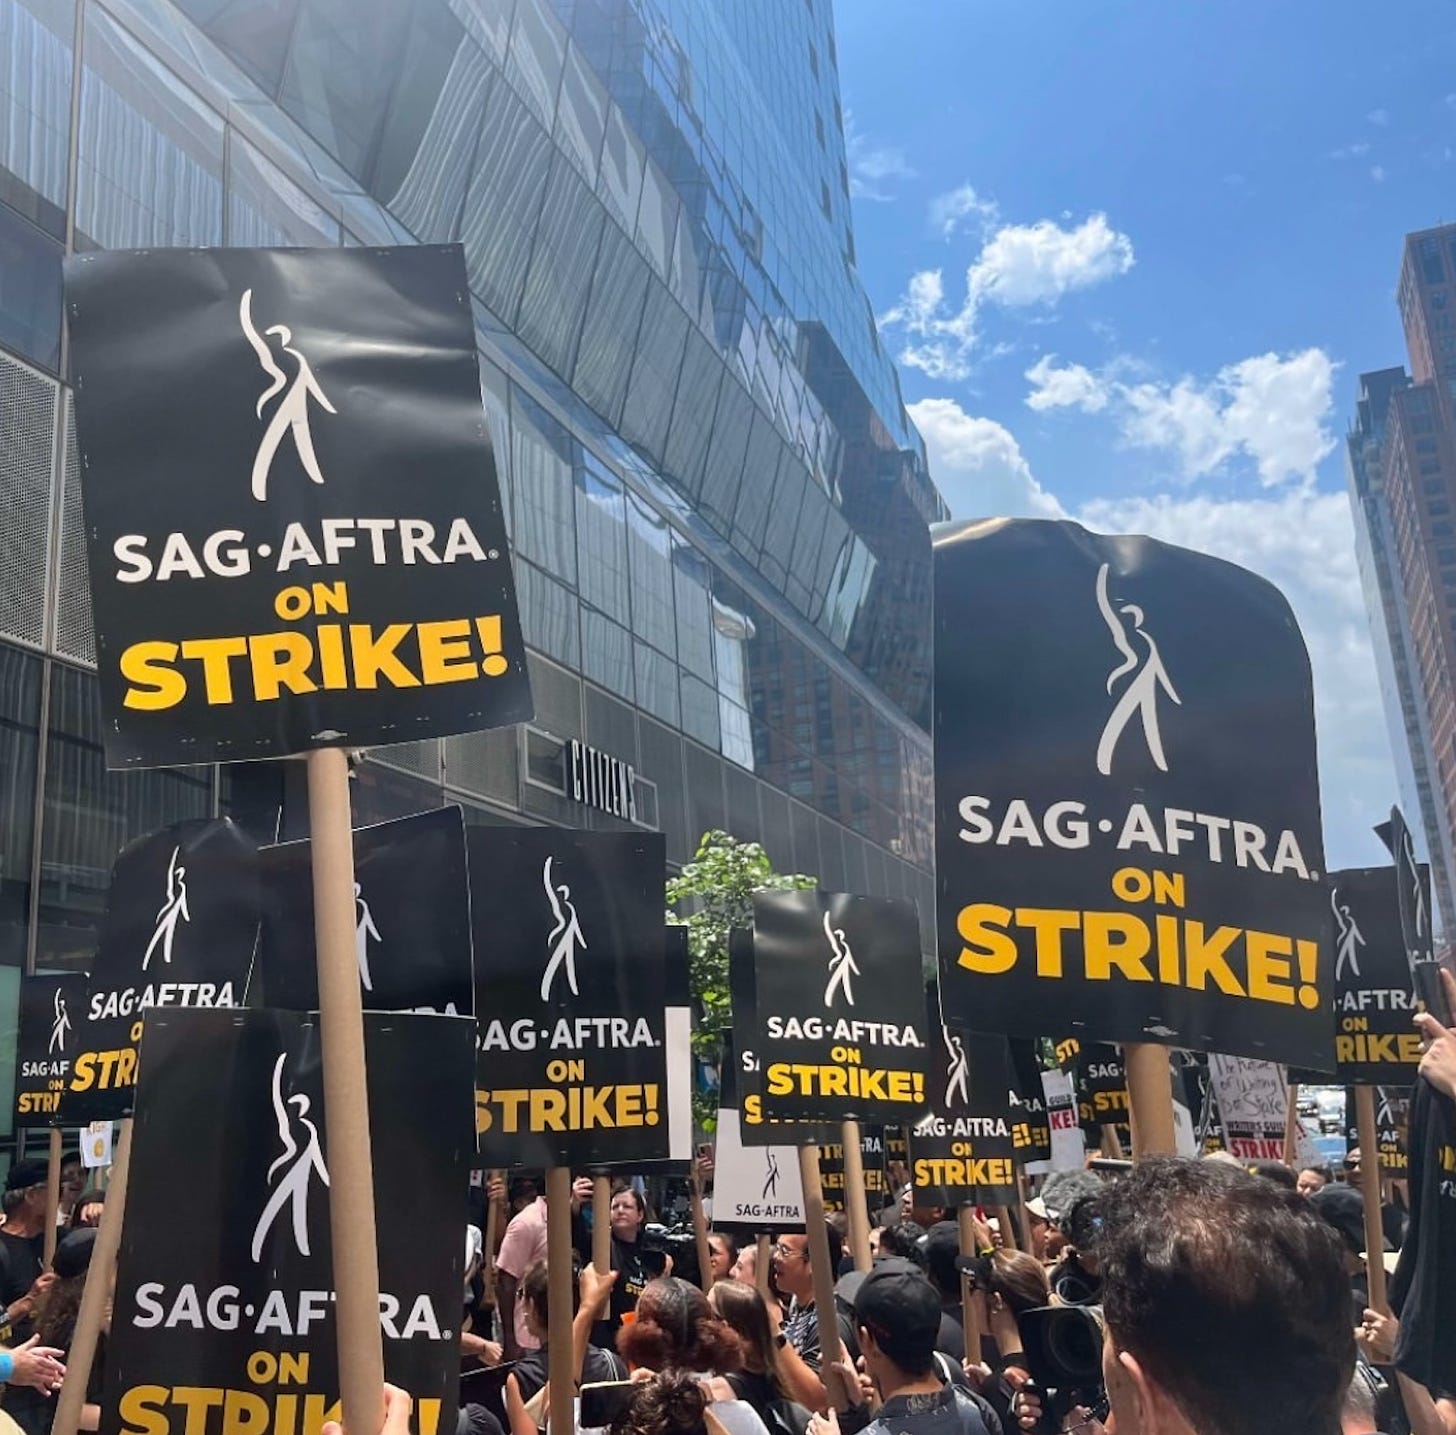 A large group of picketers holding "SAG-AFTRA ON STRIKE" signs.